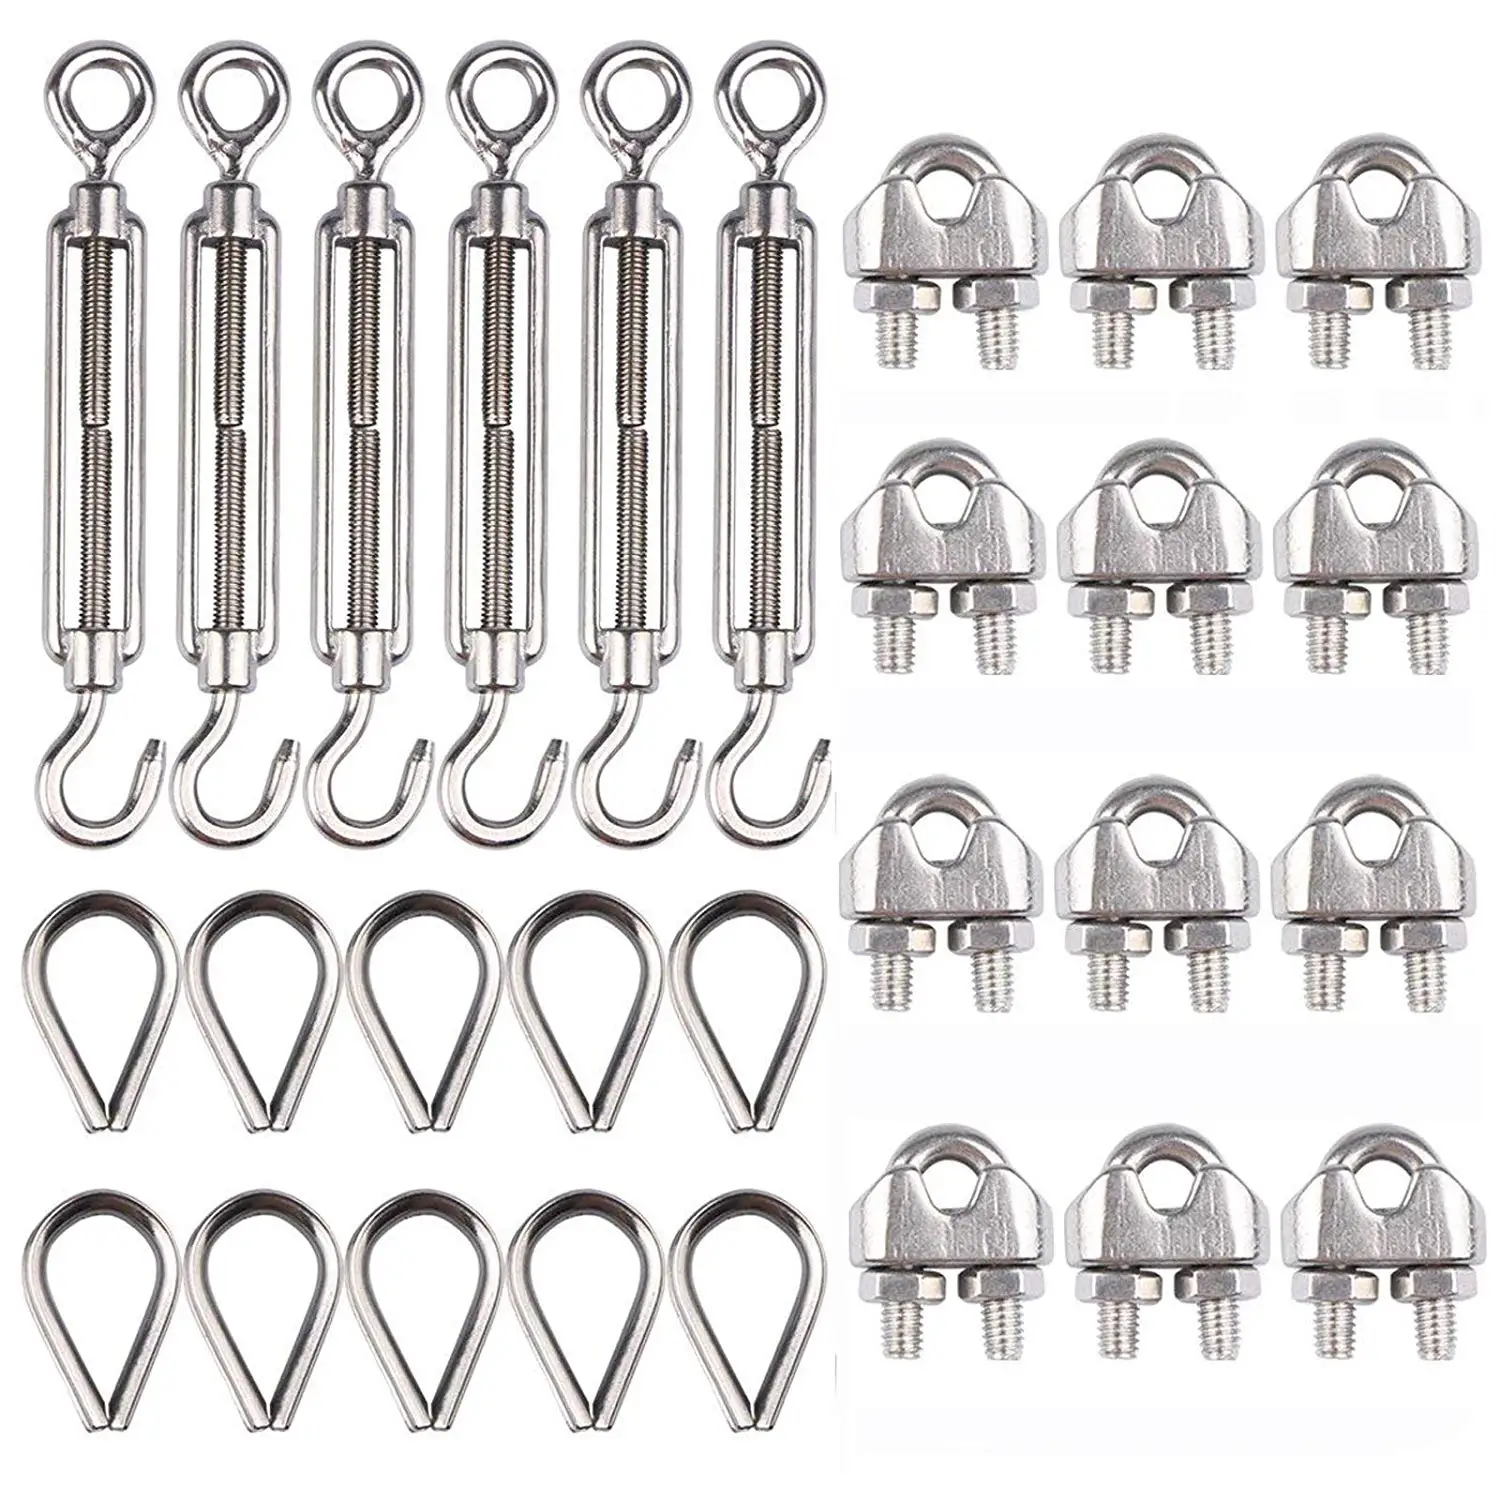 HEVERP 6Pcs M6 Stainless Steel Eye & Eye Turnbuckles Light Duty Wire Rope Tension/Double Eyes 